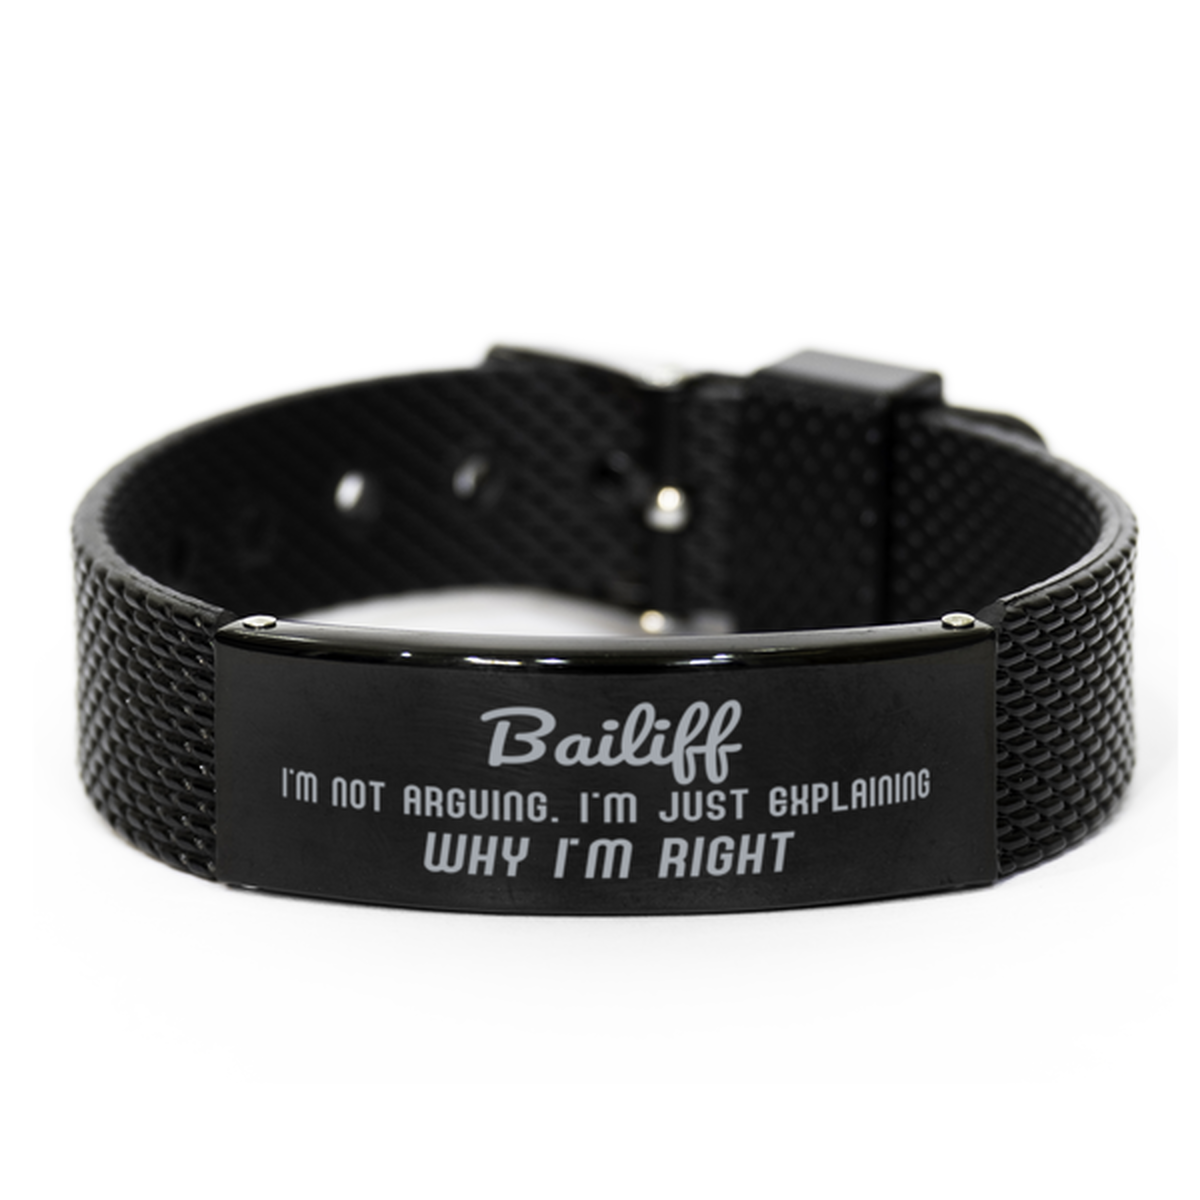 Bailiff I'm not Arguing. I'm Just Explaining Why I'm RIGHT Black Shark Mesh Bracelet, Funny Saying Quote Bailiff Gifts For Bailiff Graduation Birthday Christmas Gifts for Men Women Coworker